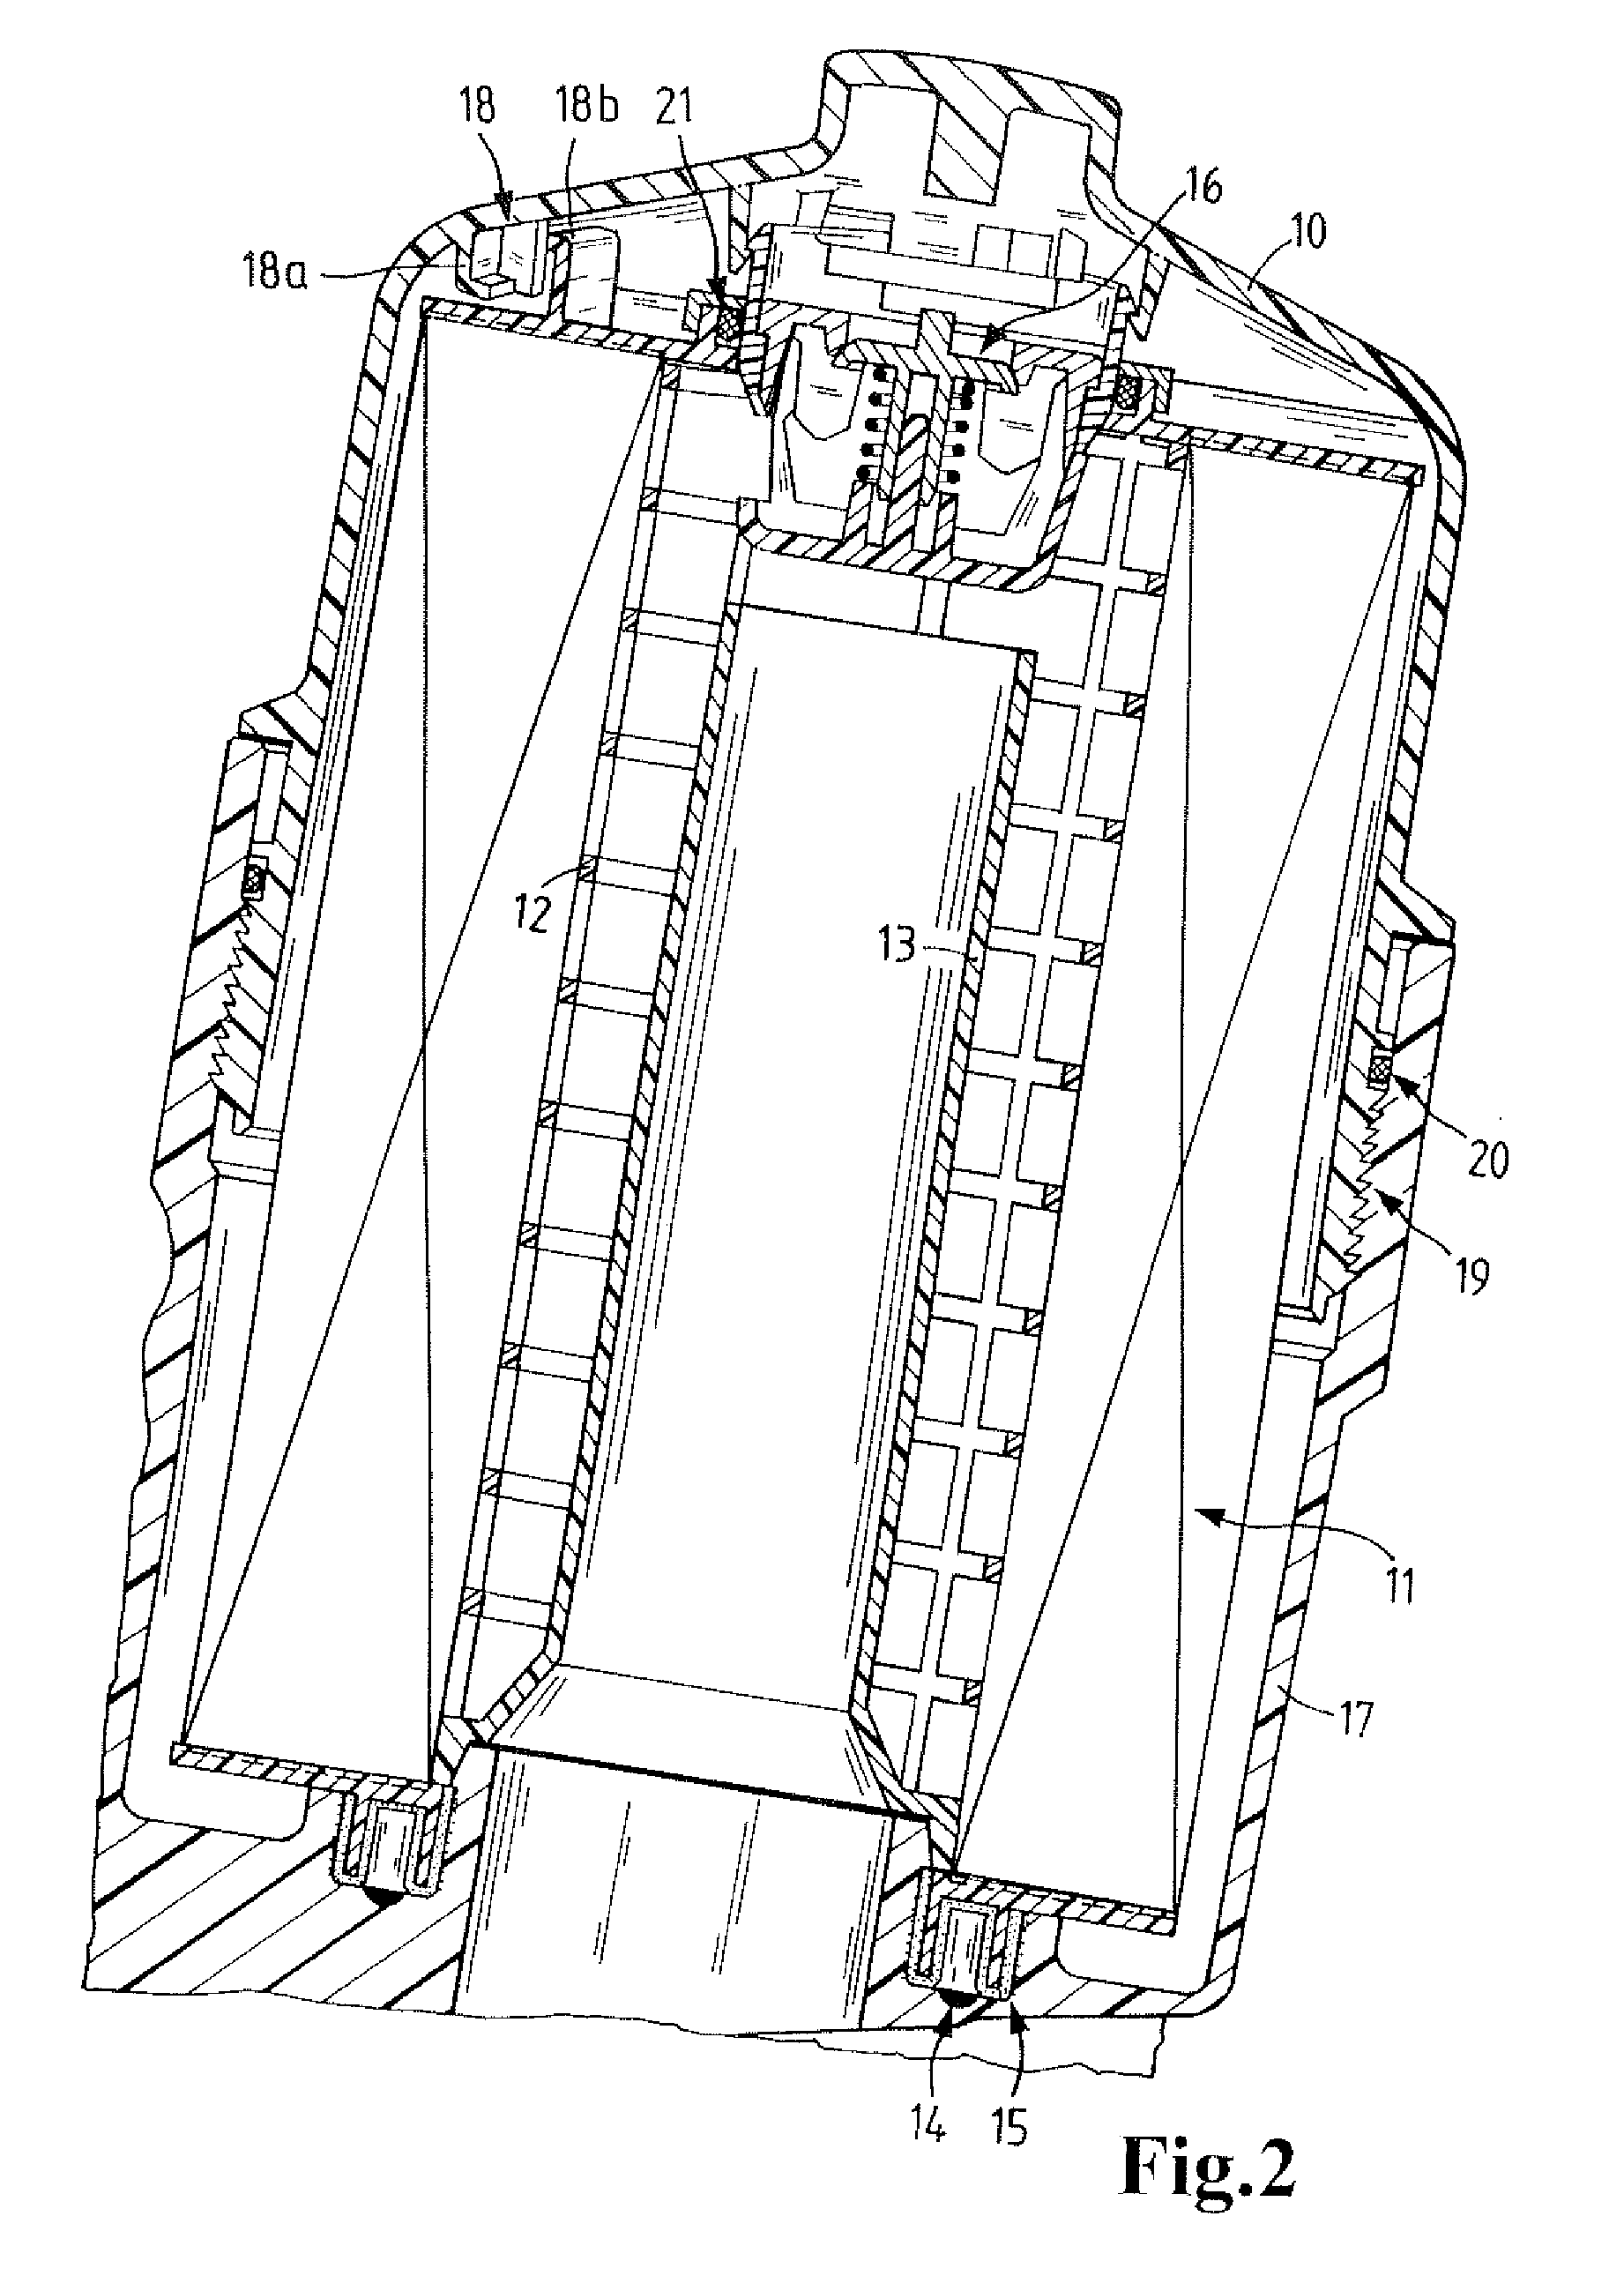 Filter with bayonet coupling to cover